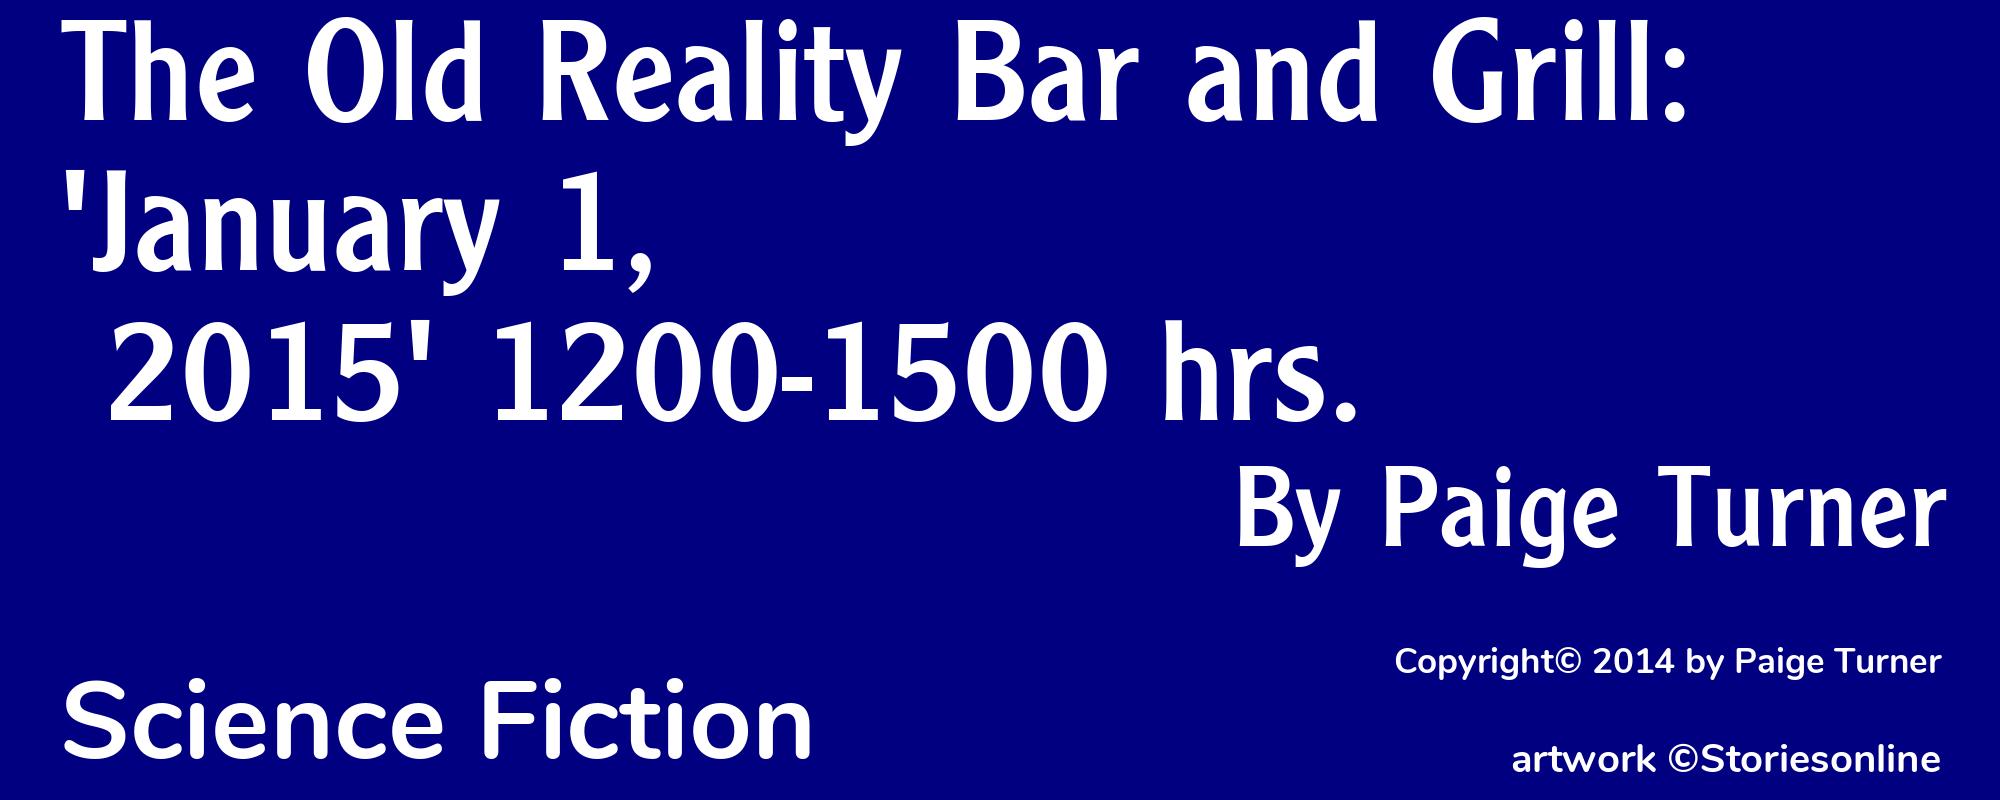 The Old Reality Bar and Grill: 'January 1, 2015' 1200-1500 hrs. - Cover